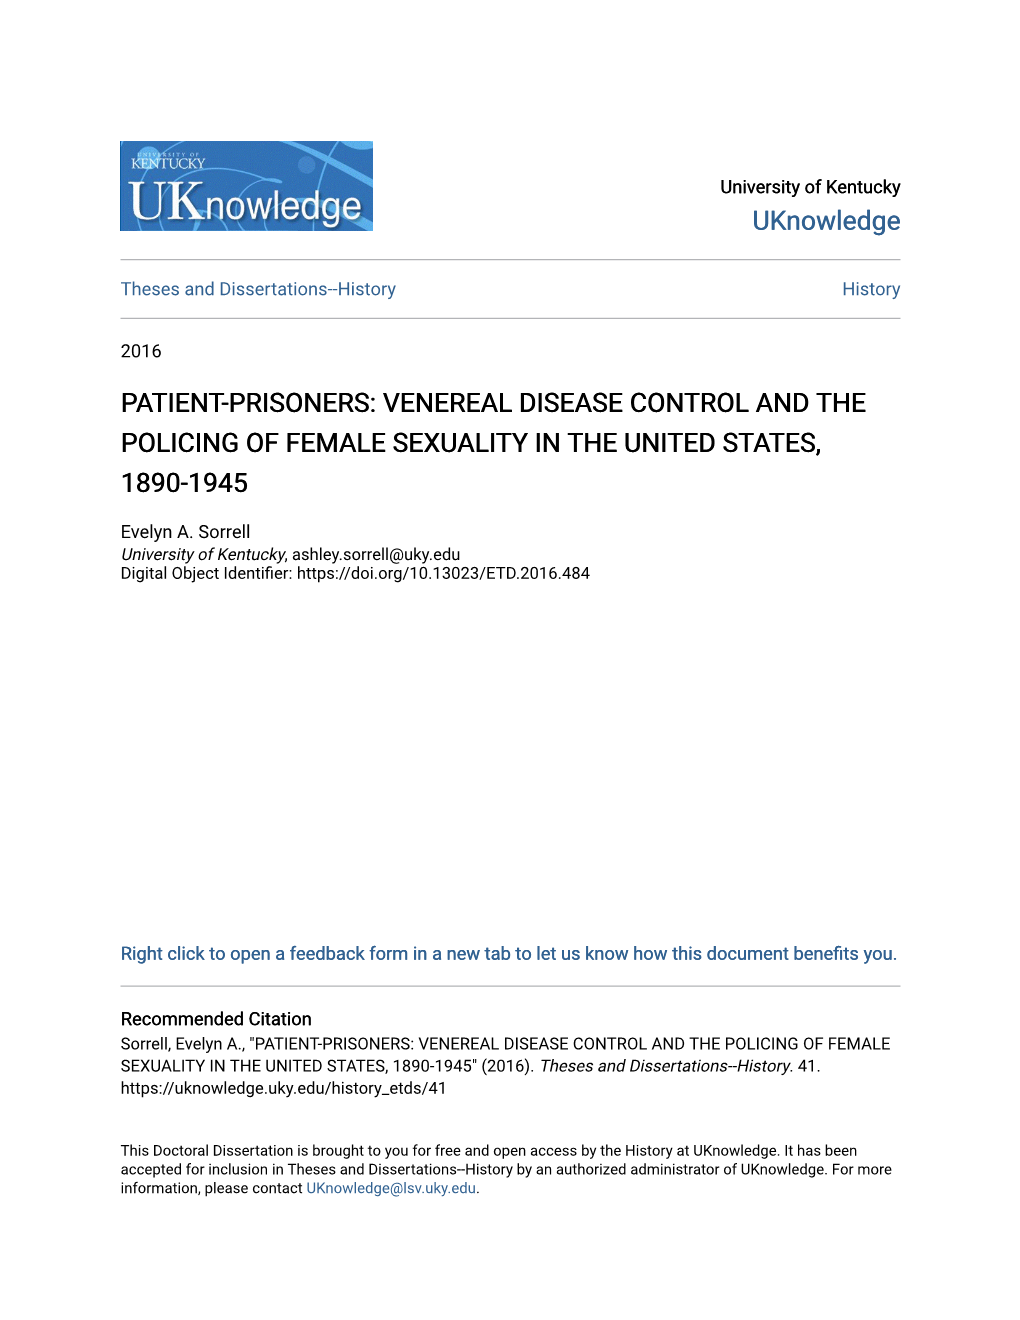 Venereal Disease Control and the Policing of Female Sexuality in the United States, 1890-1945